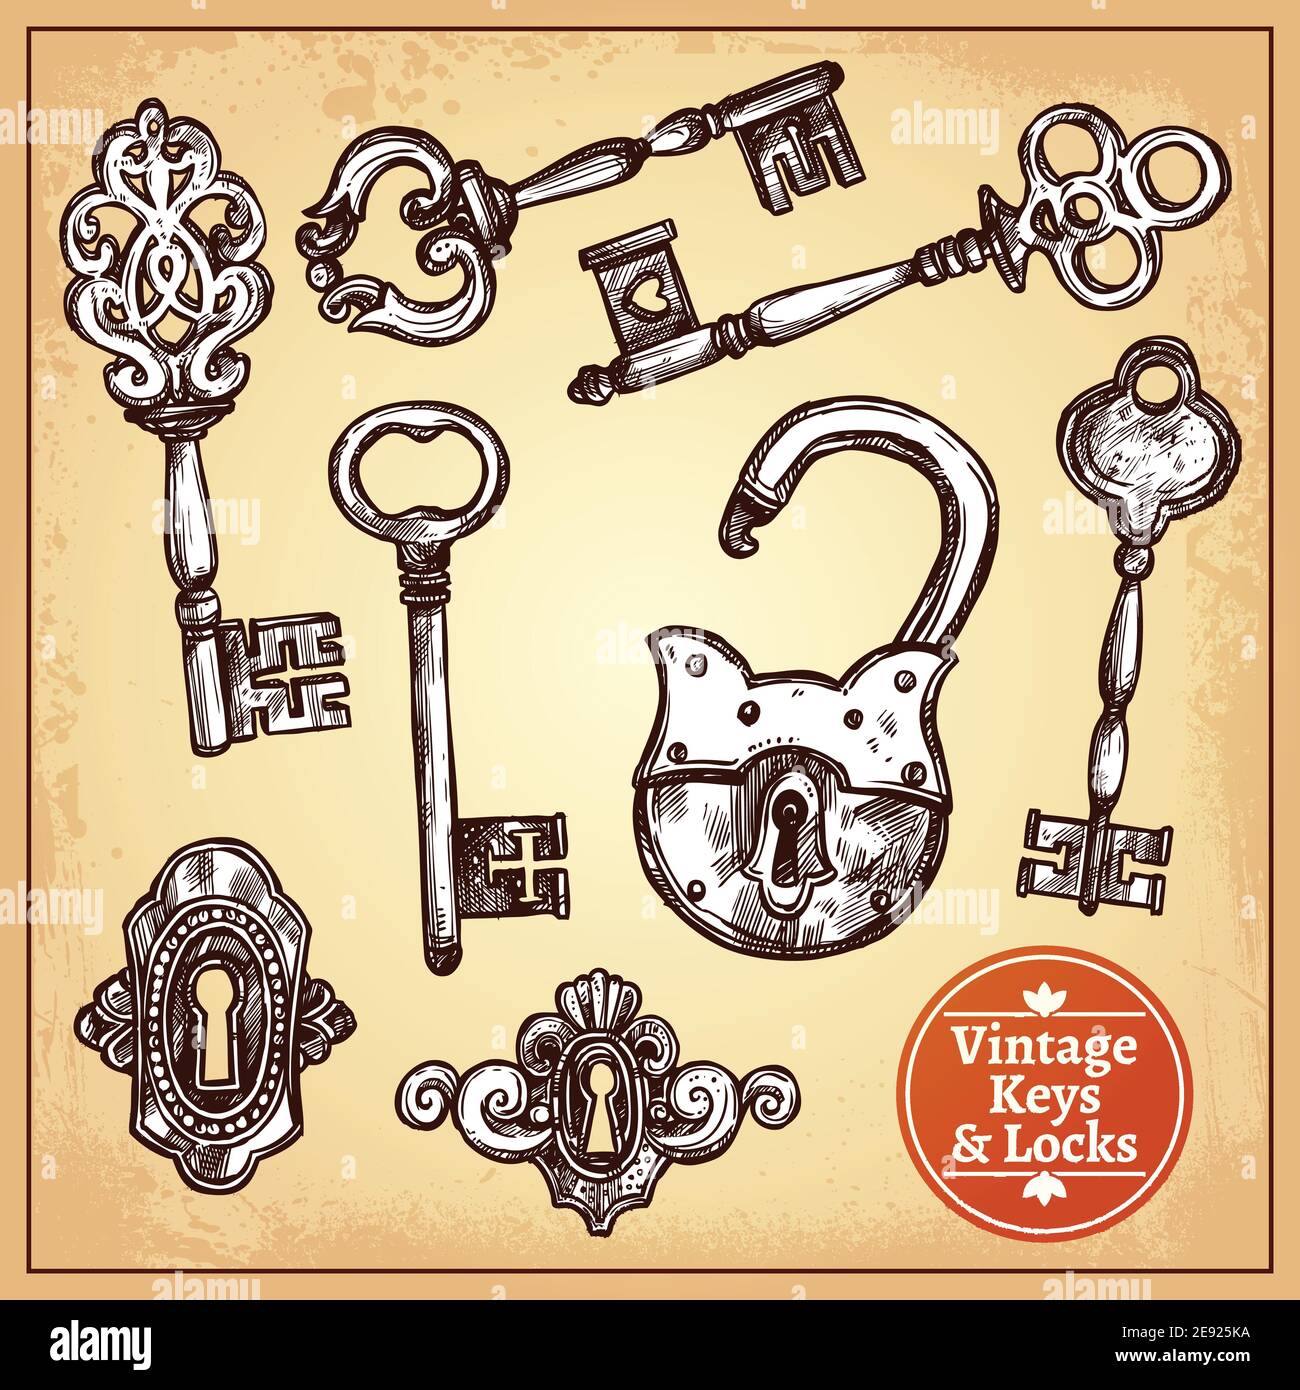 Vintage keys and locks hand-drawn collection Vector Image